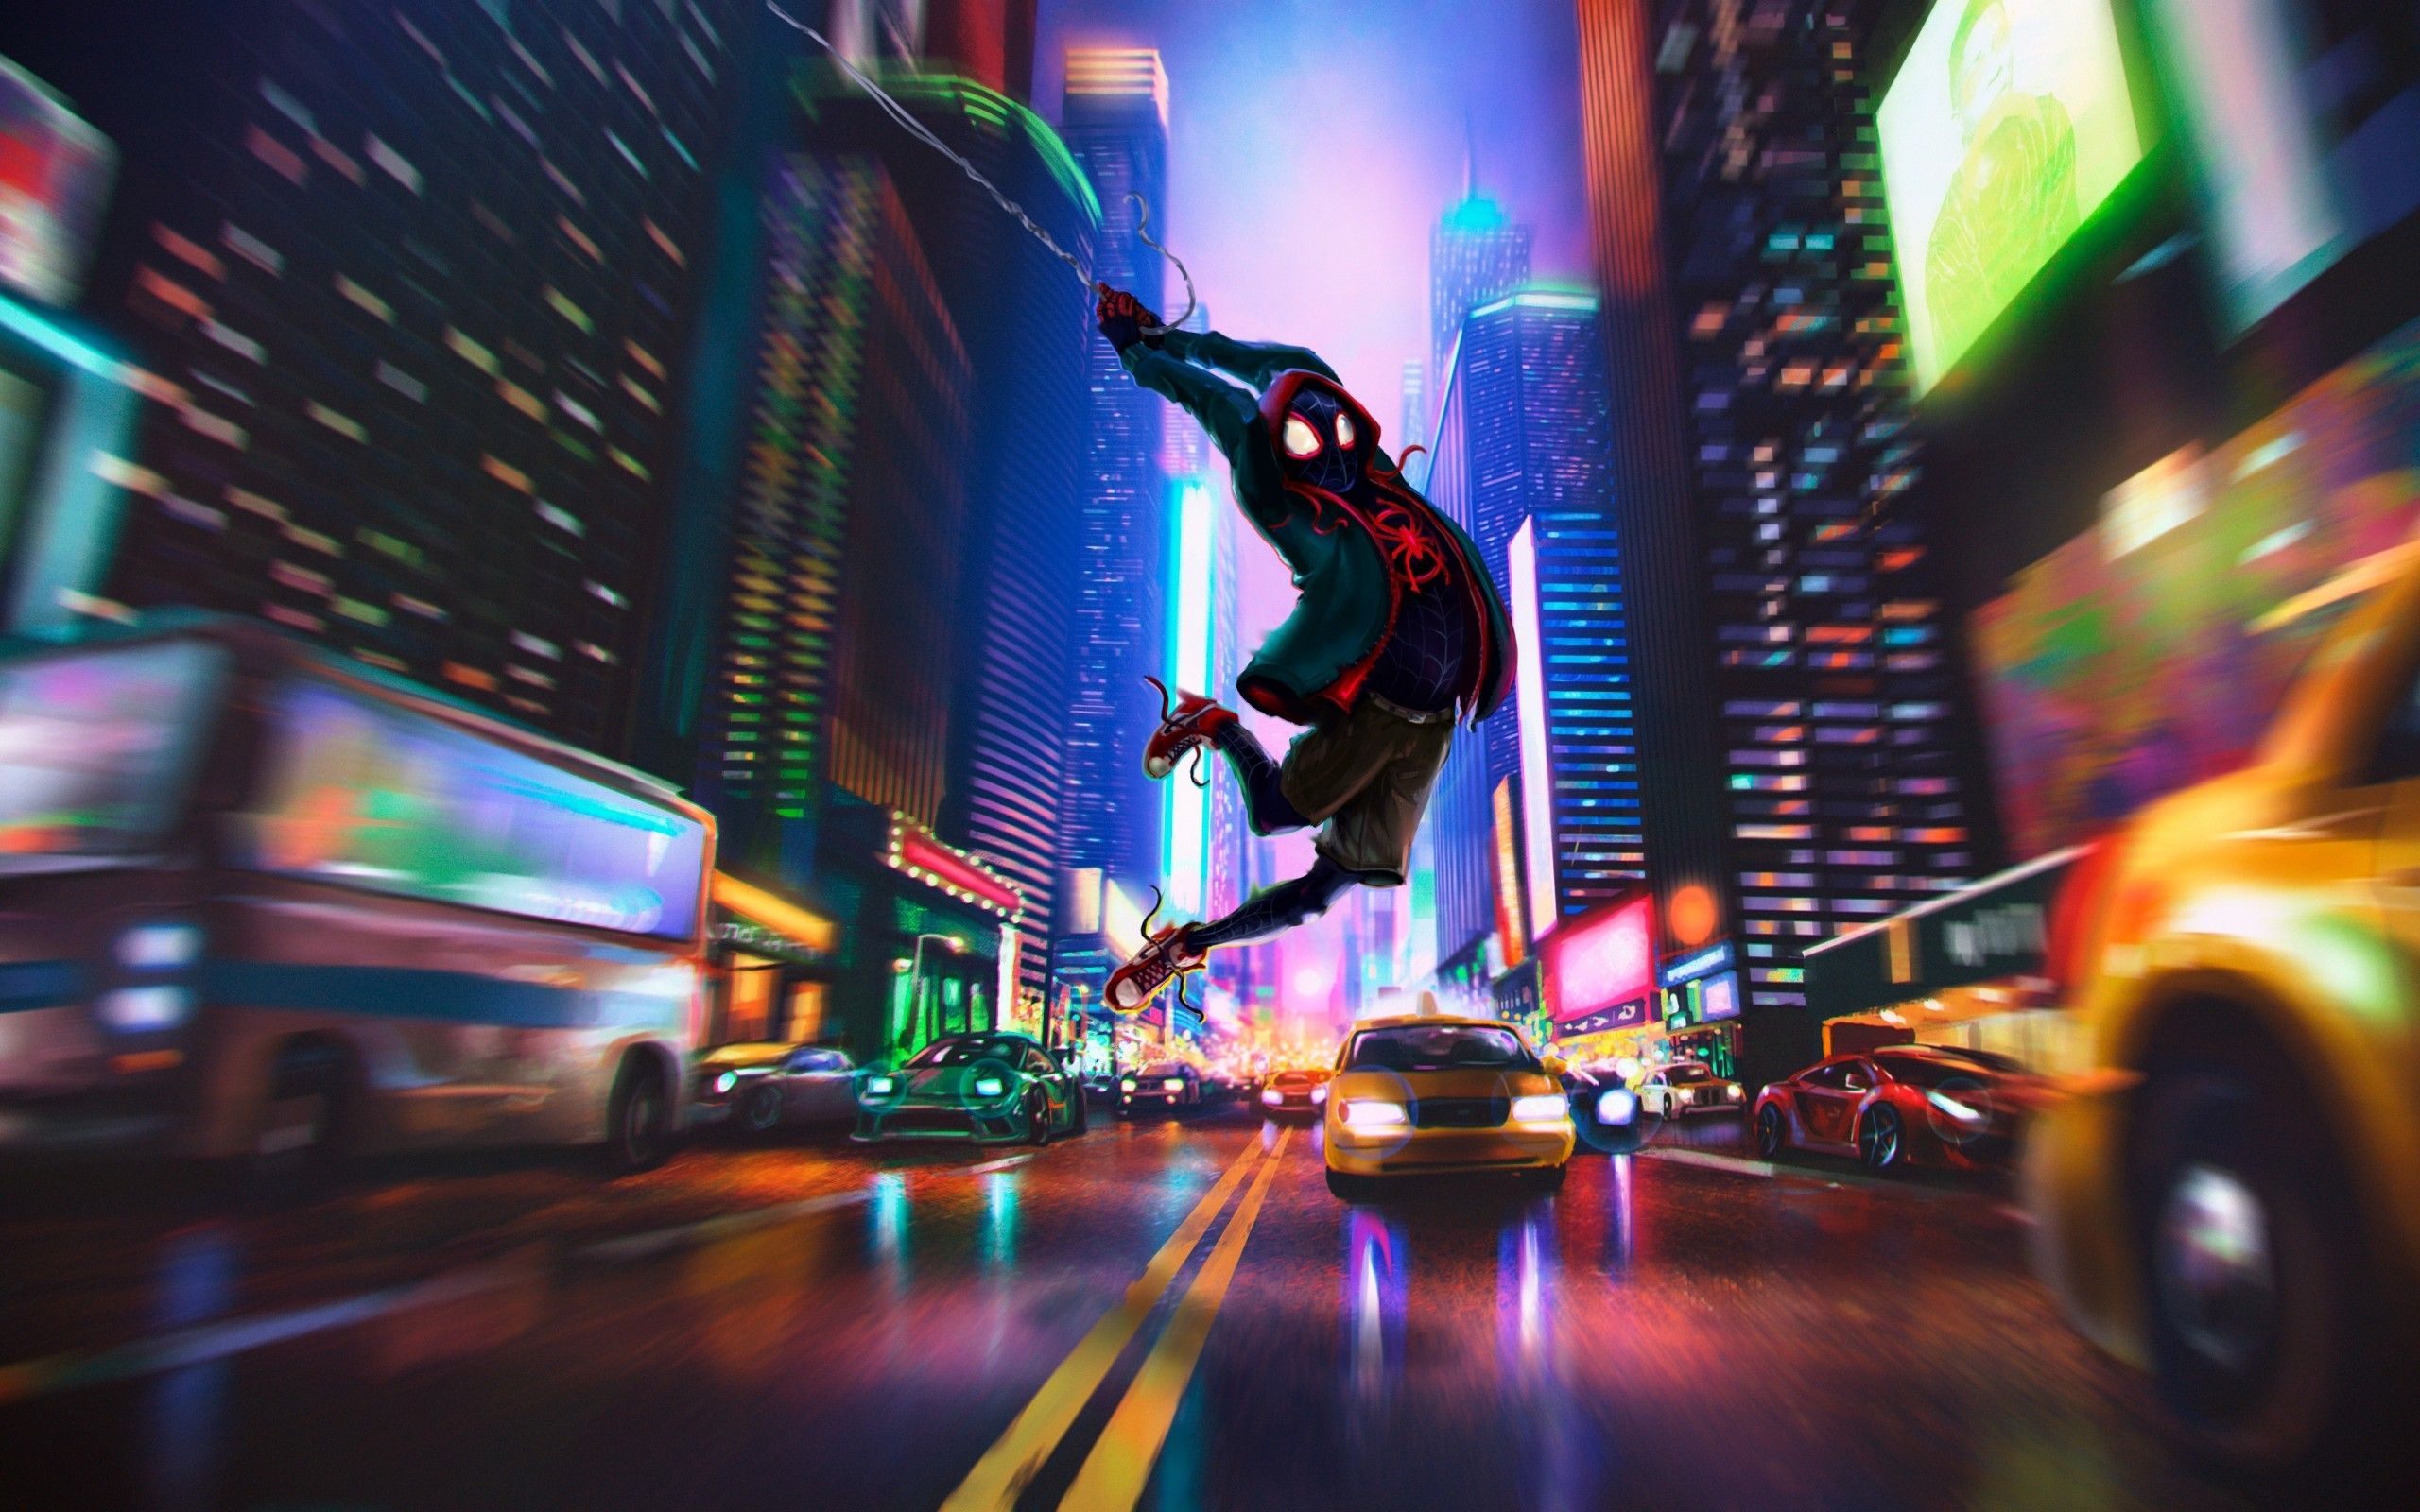 Download 2560x1600 Spider Man: Into The Spider Verse, New York, Urban, Night, Vehicles, Animation, Artwork Wallpaper For MacBook Pro 13 Inch